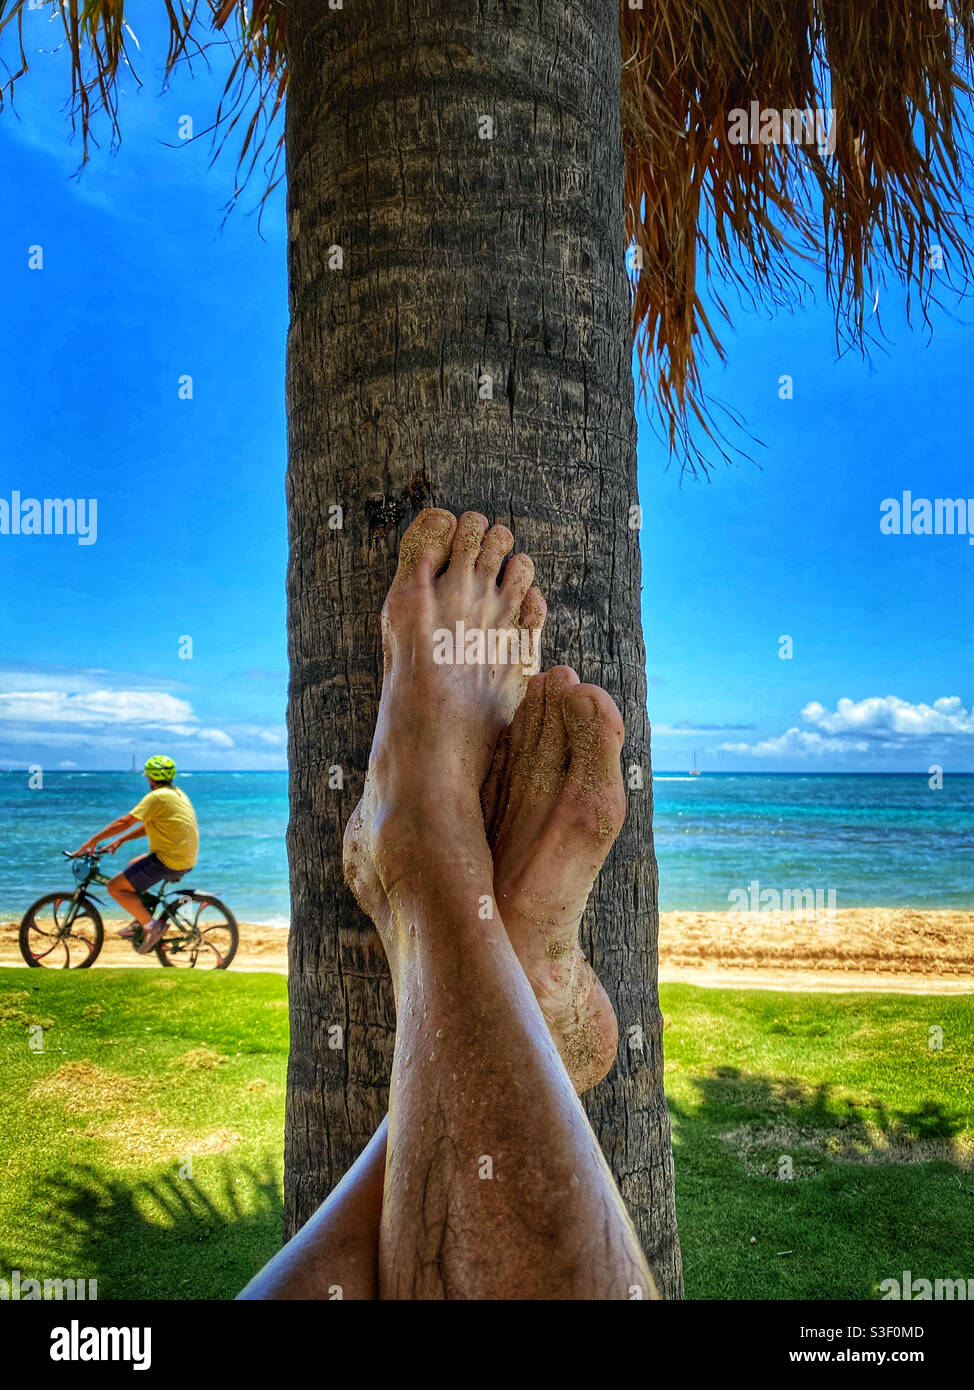 Sandy feet resting against the trunk of a palm tree as a bicyclist pedals past Stock Photo